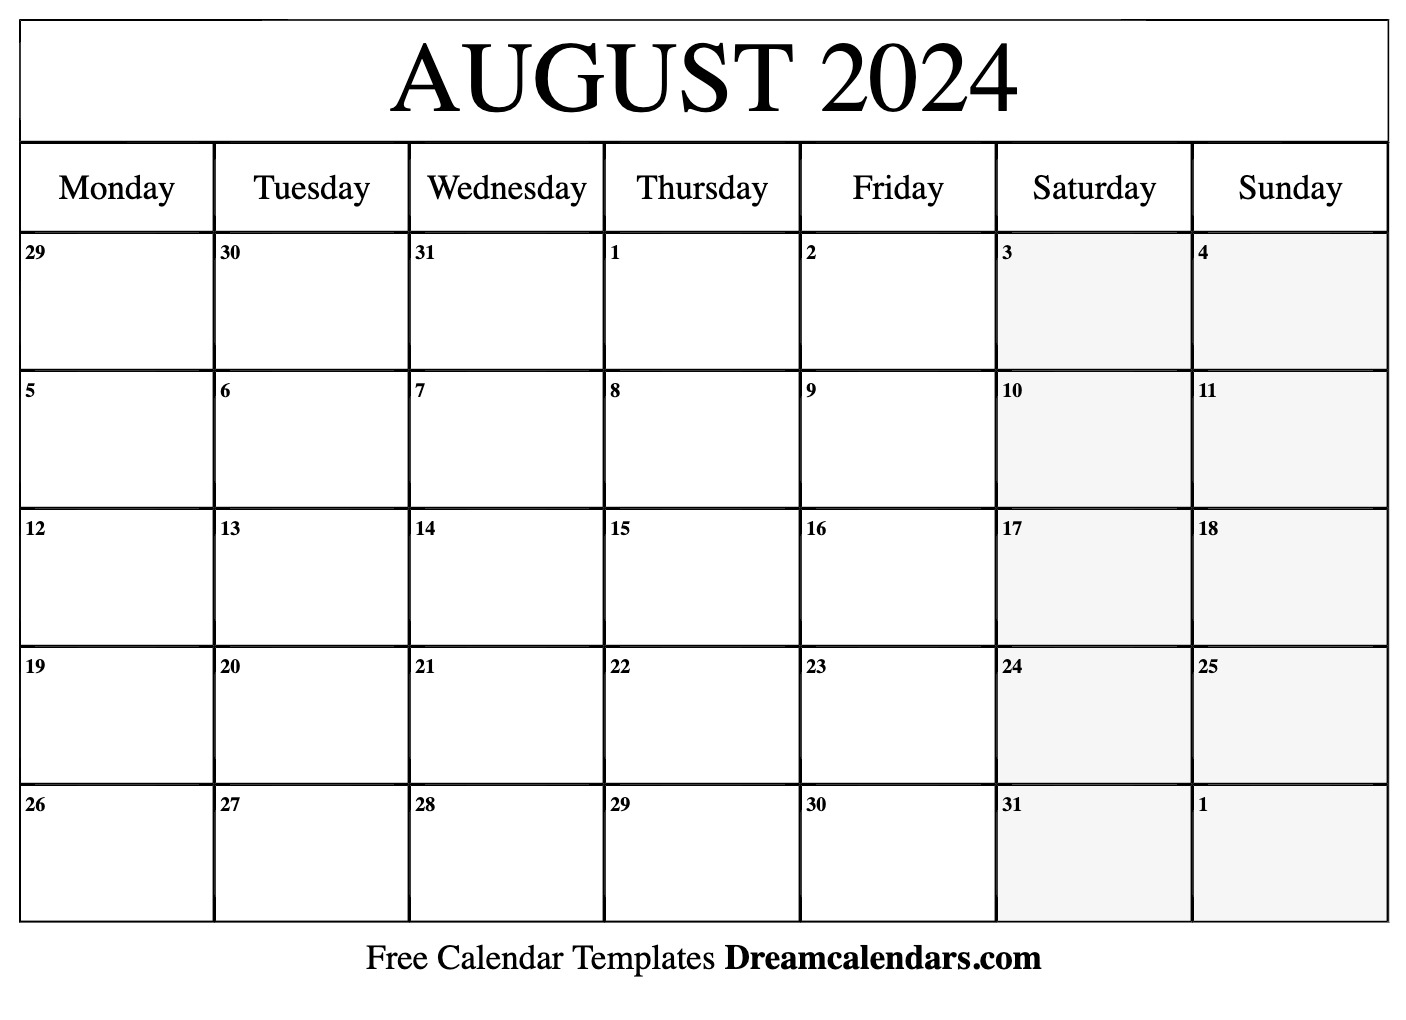 August 2024 Calendar | Free Blank Printable With Holidays for July August Printable Calendar 2024